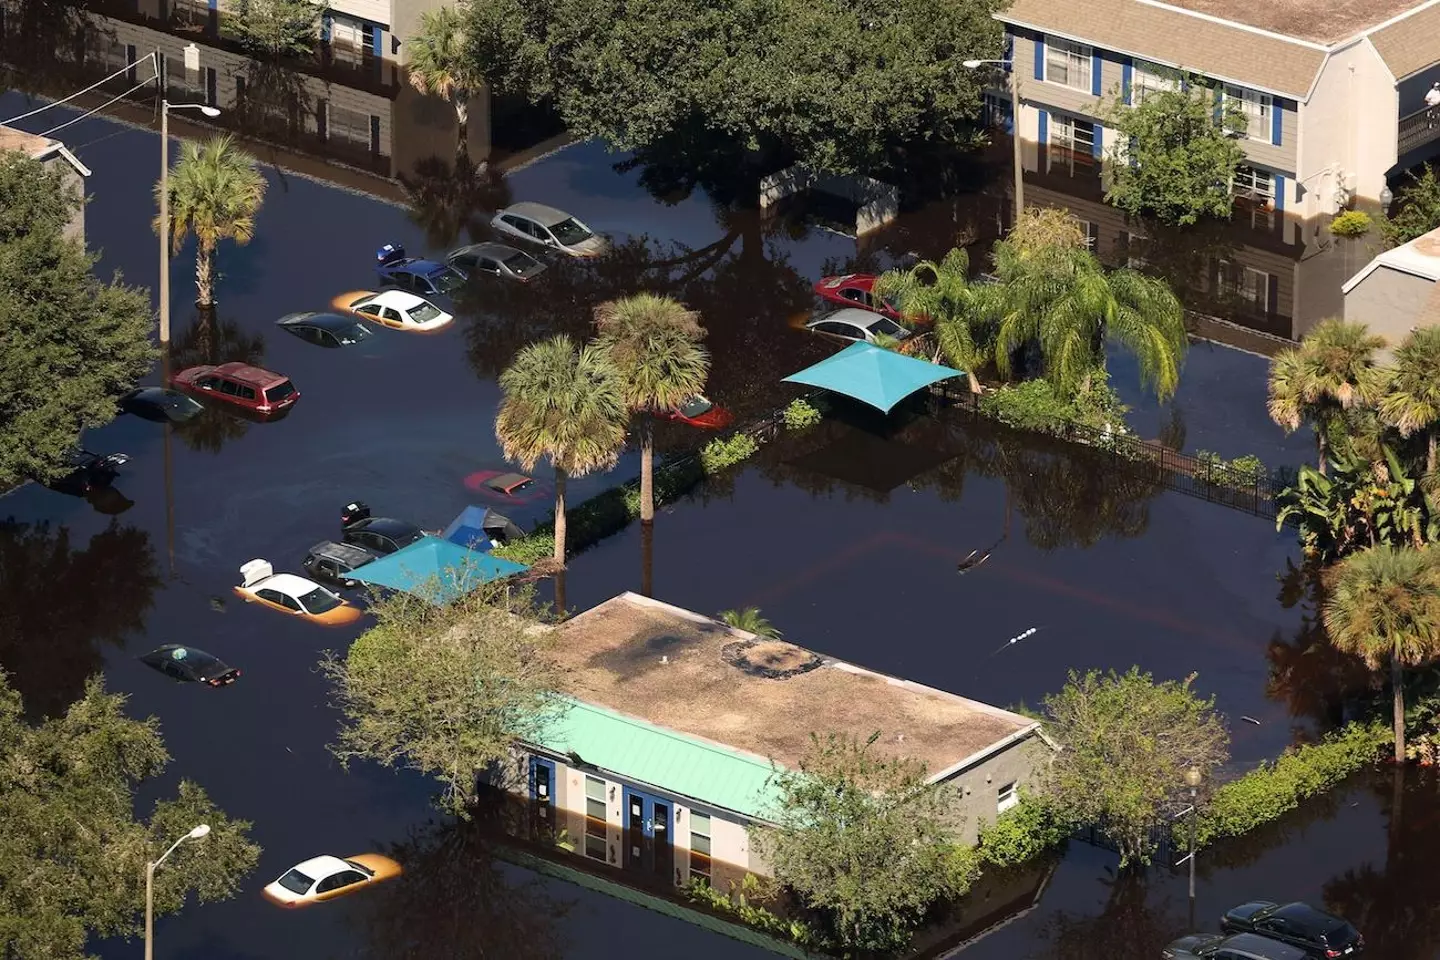 The Place at Alafaya is flooded in the aftermath of Hurricane Ian on Sept. 30, 2022, in Orlando, Florida.